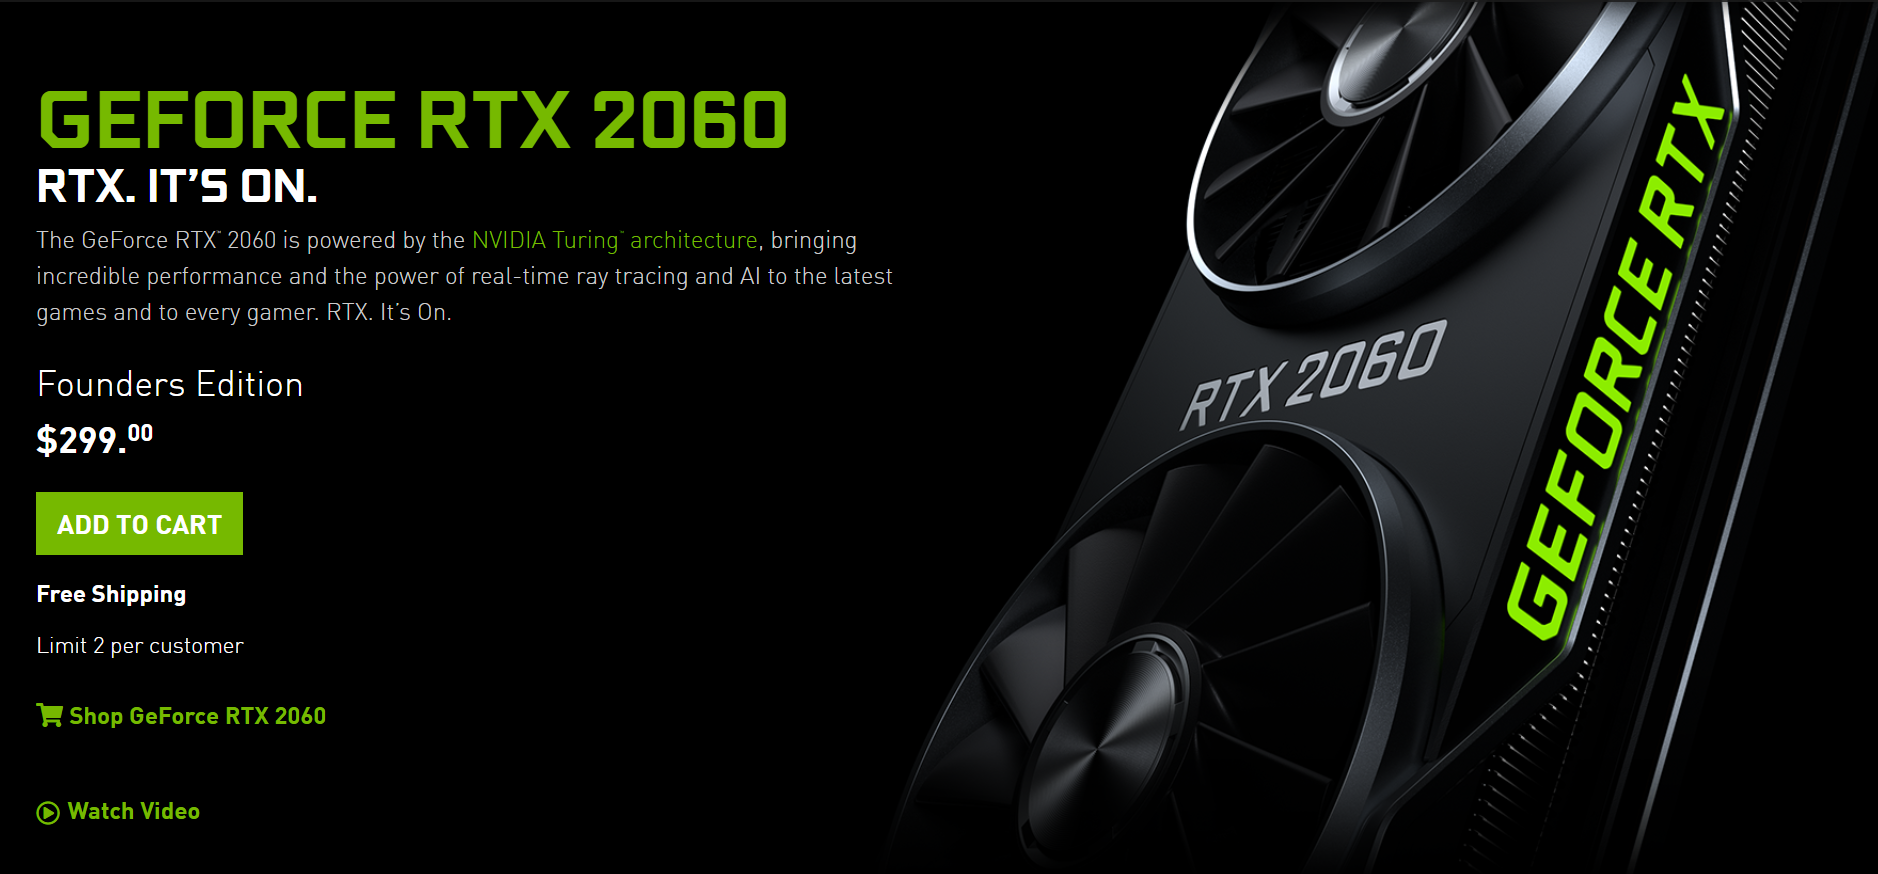 NVIDIA-GeForce-RTX-2060-299-US-Price.png